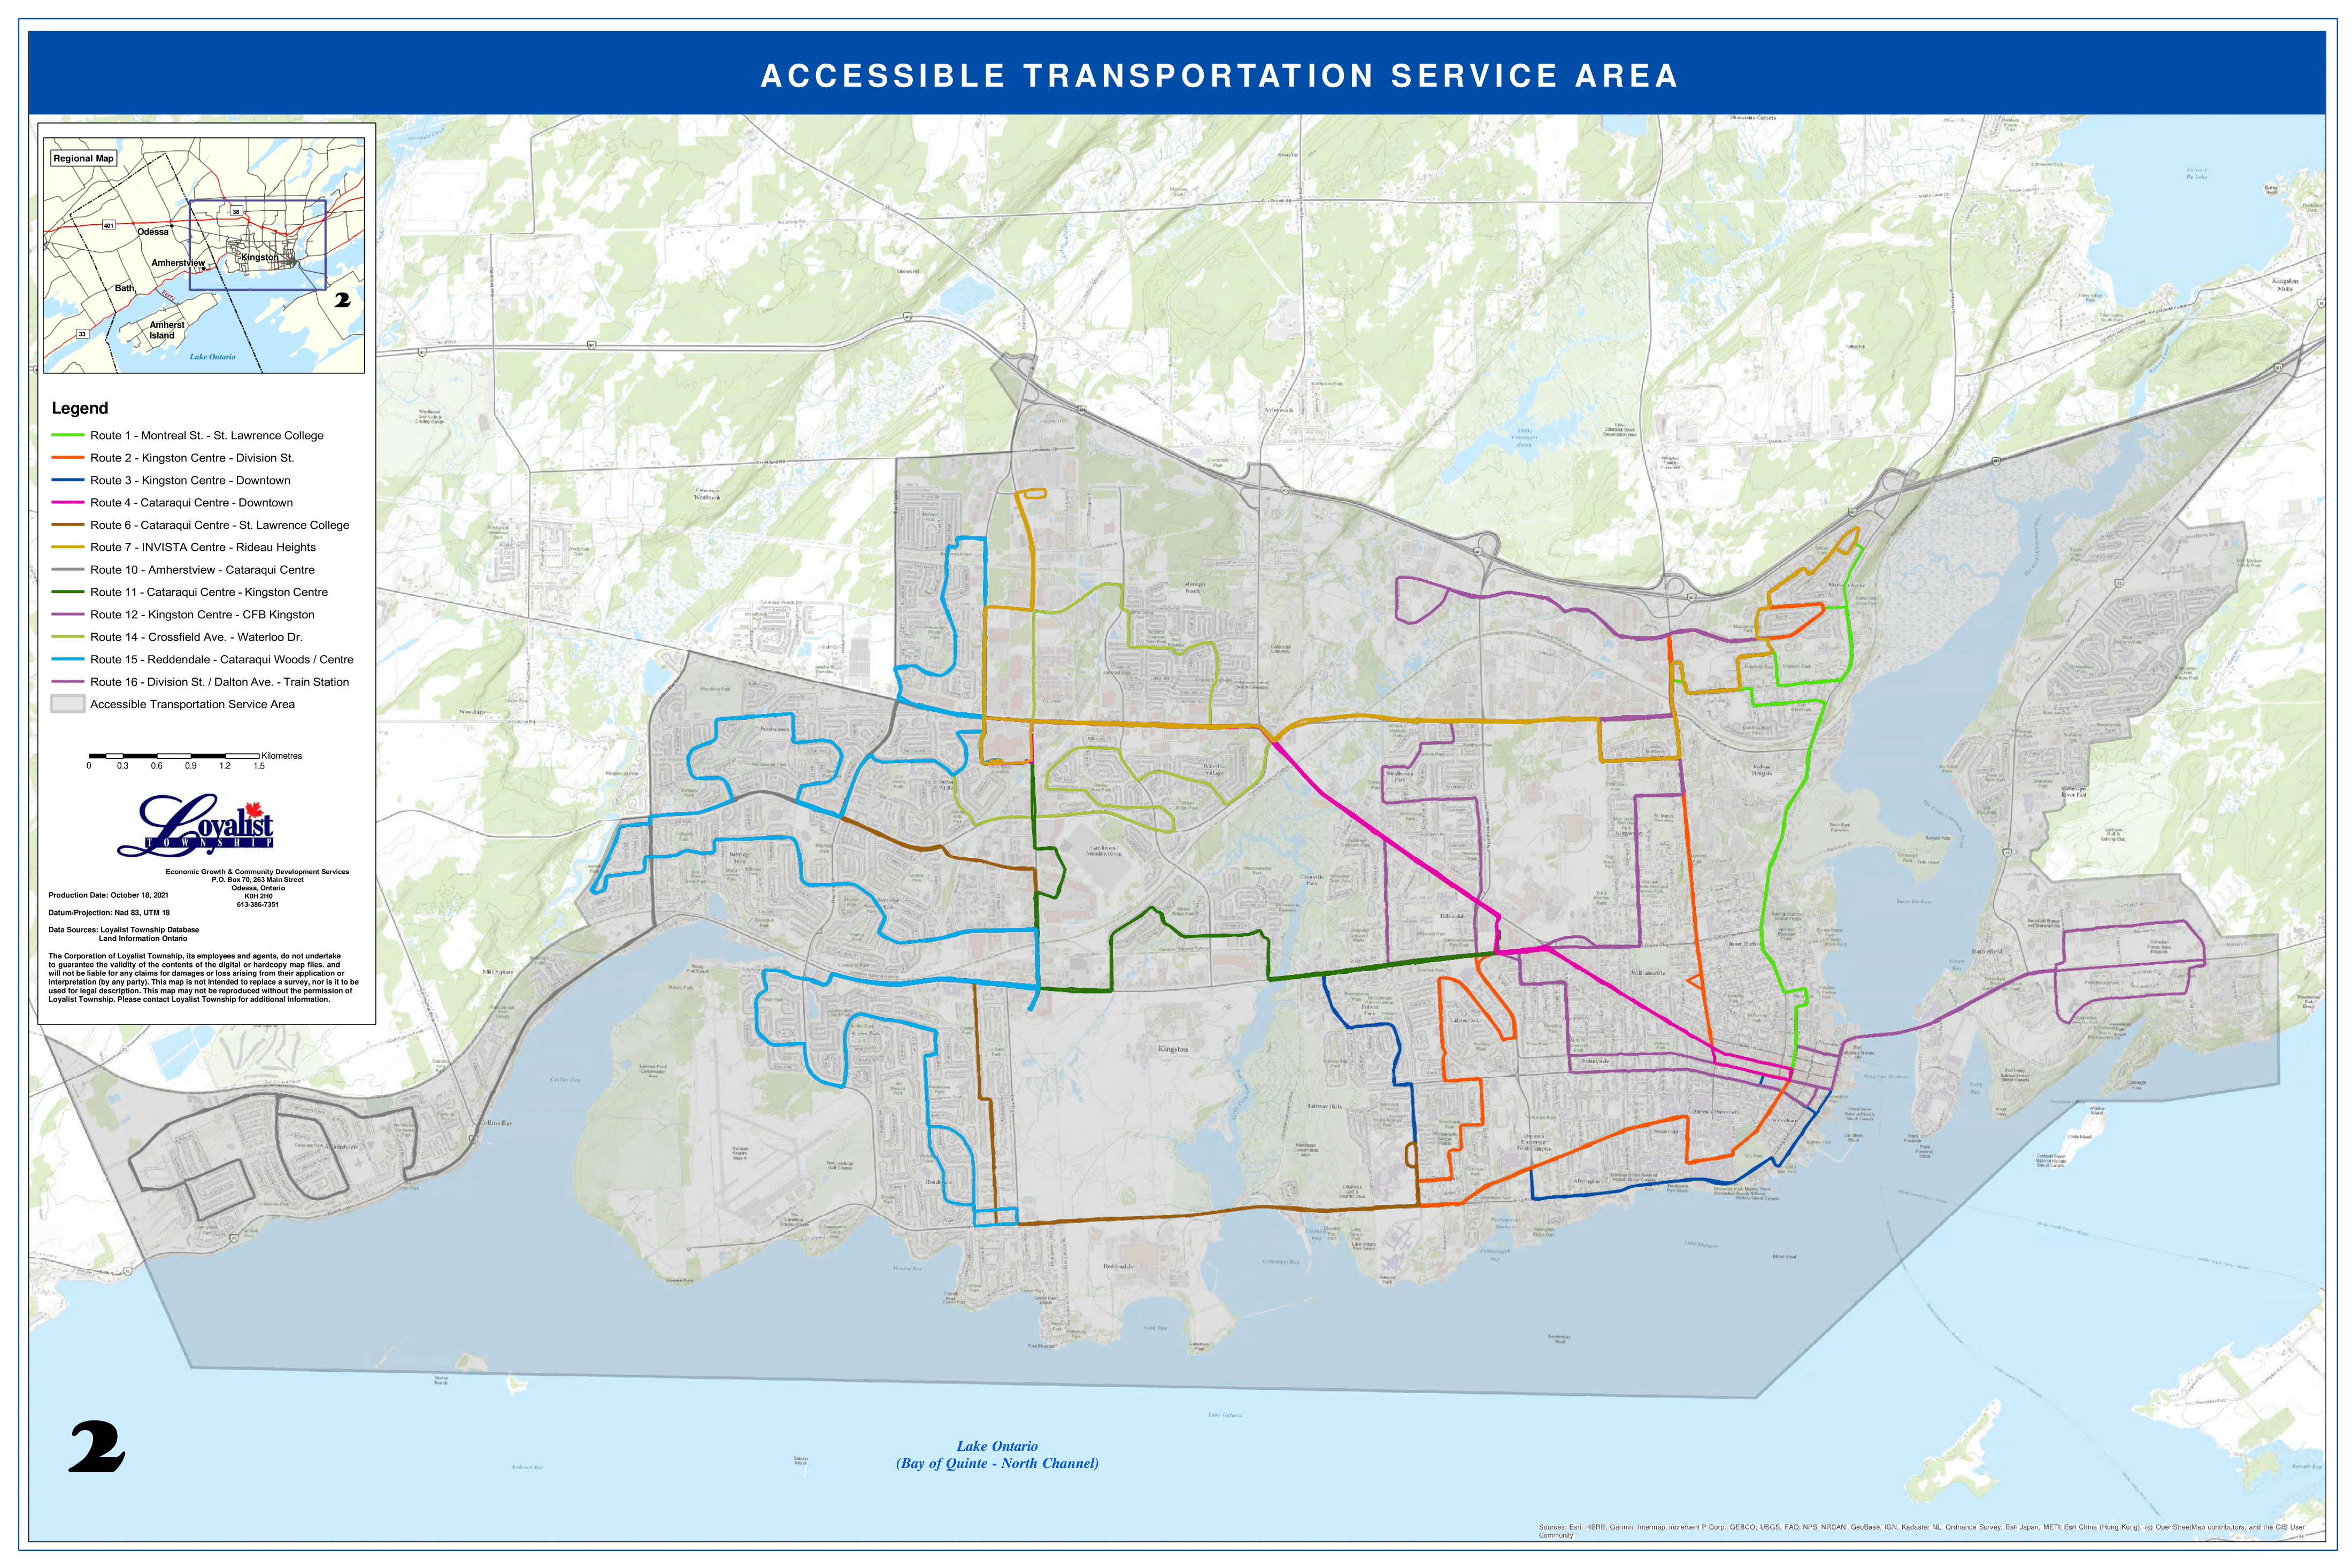 Loyalist Township Accessible Transit Service Area Map